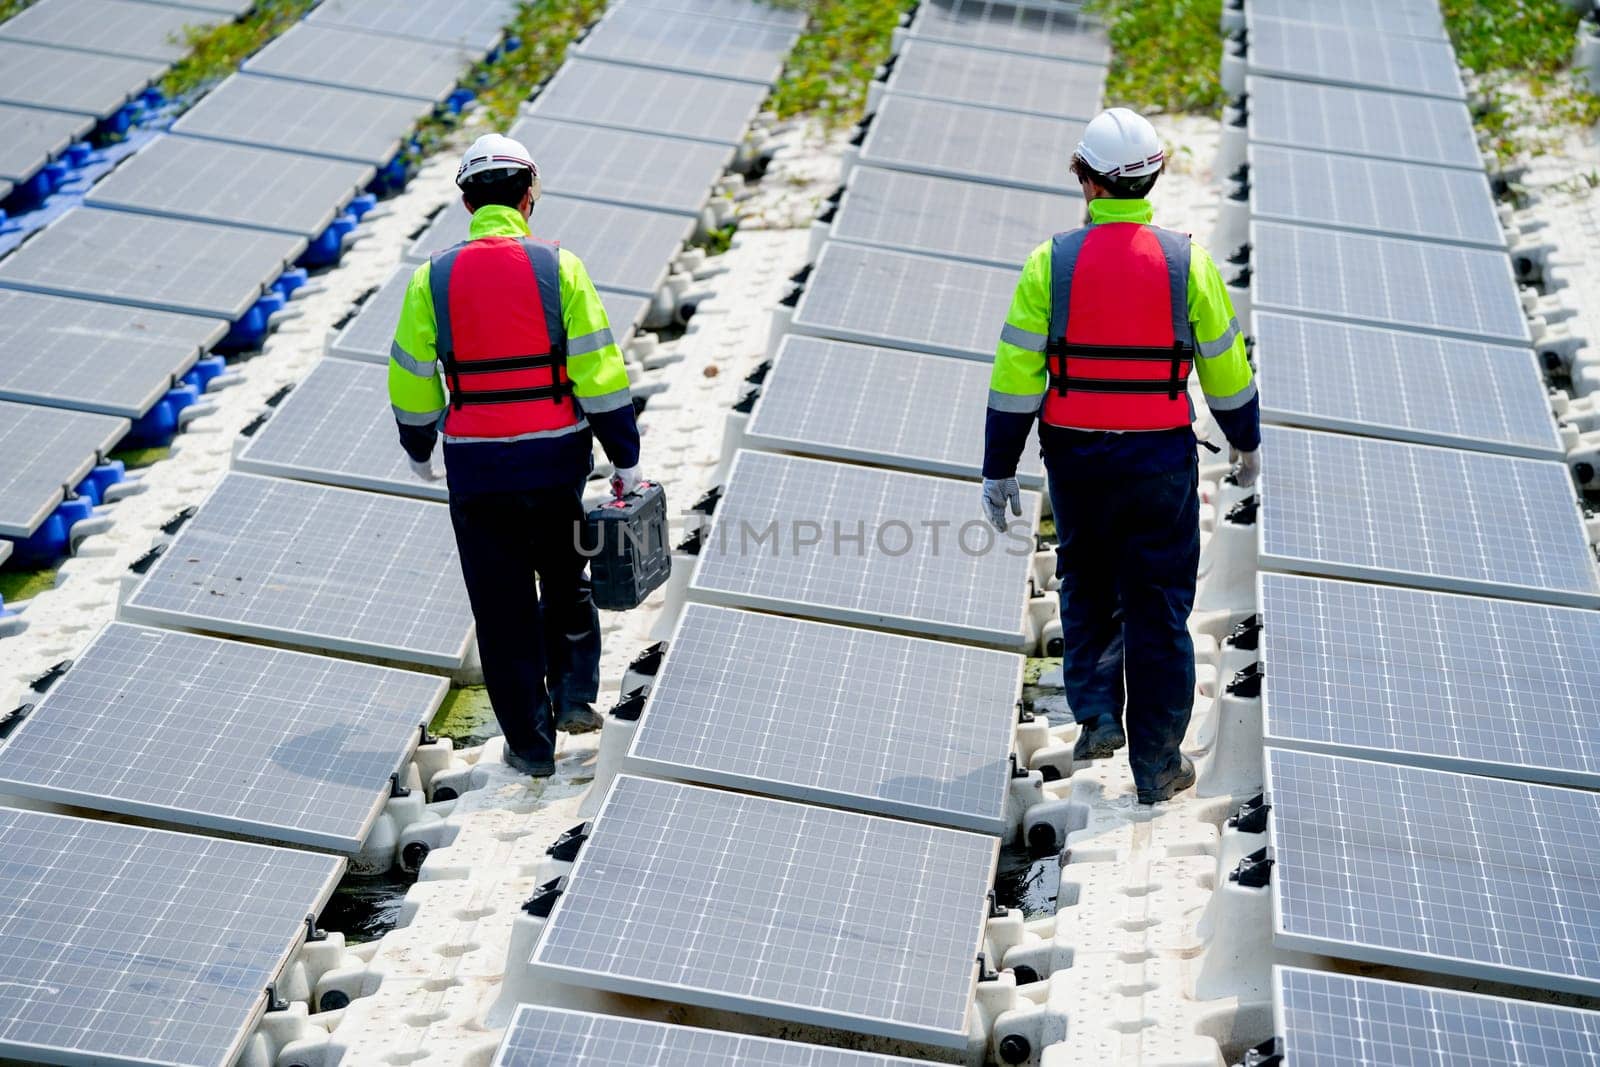 Back of professional with safety uniform walk on footpath along row of solar cell panels in workplace.